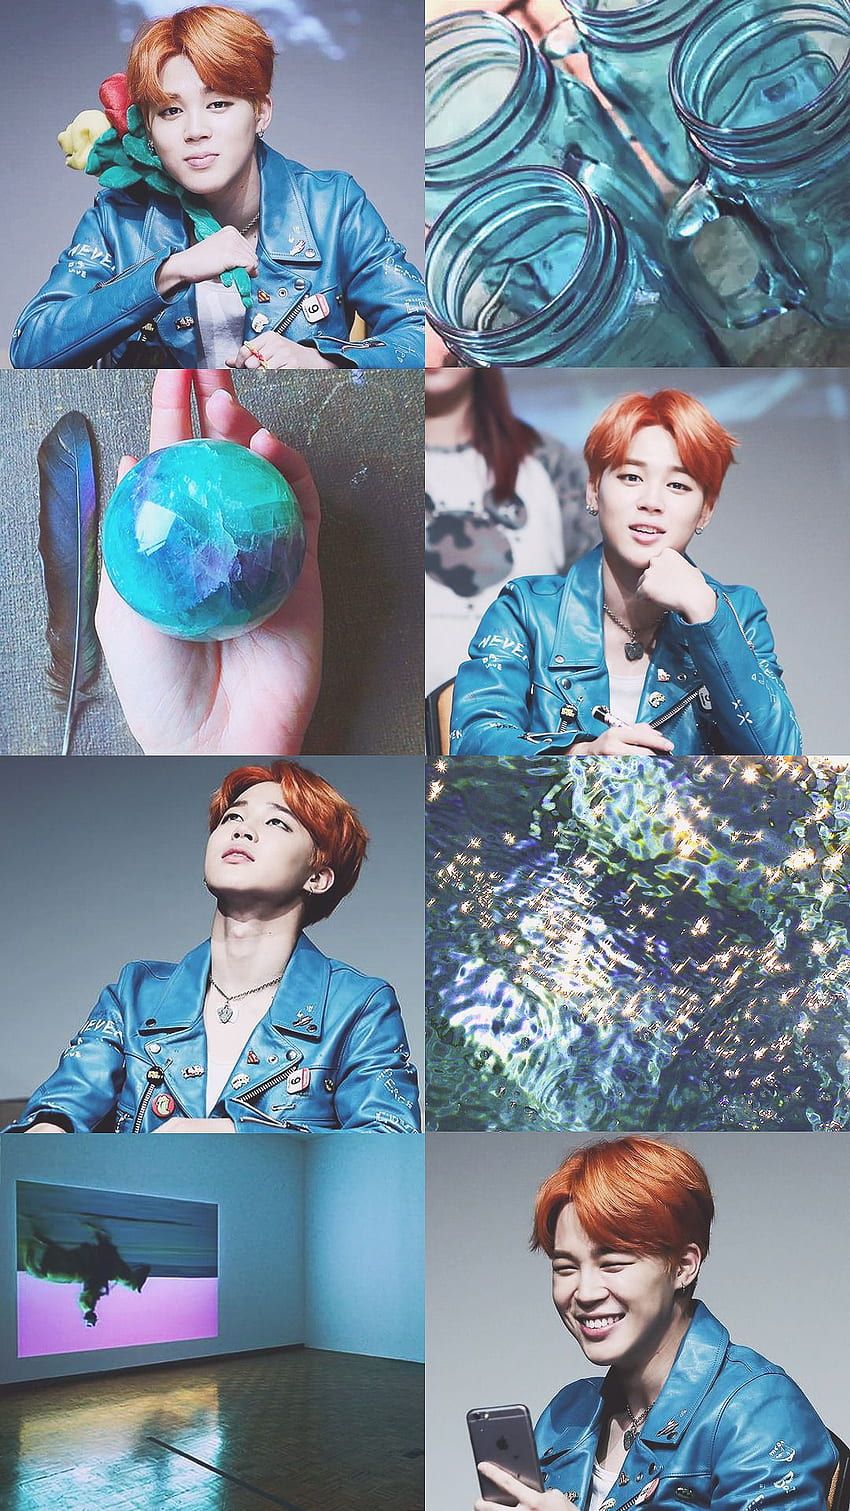 A collage of images of Jimin with different hair colors - Jimin